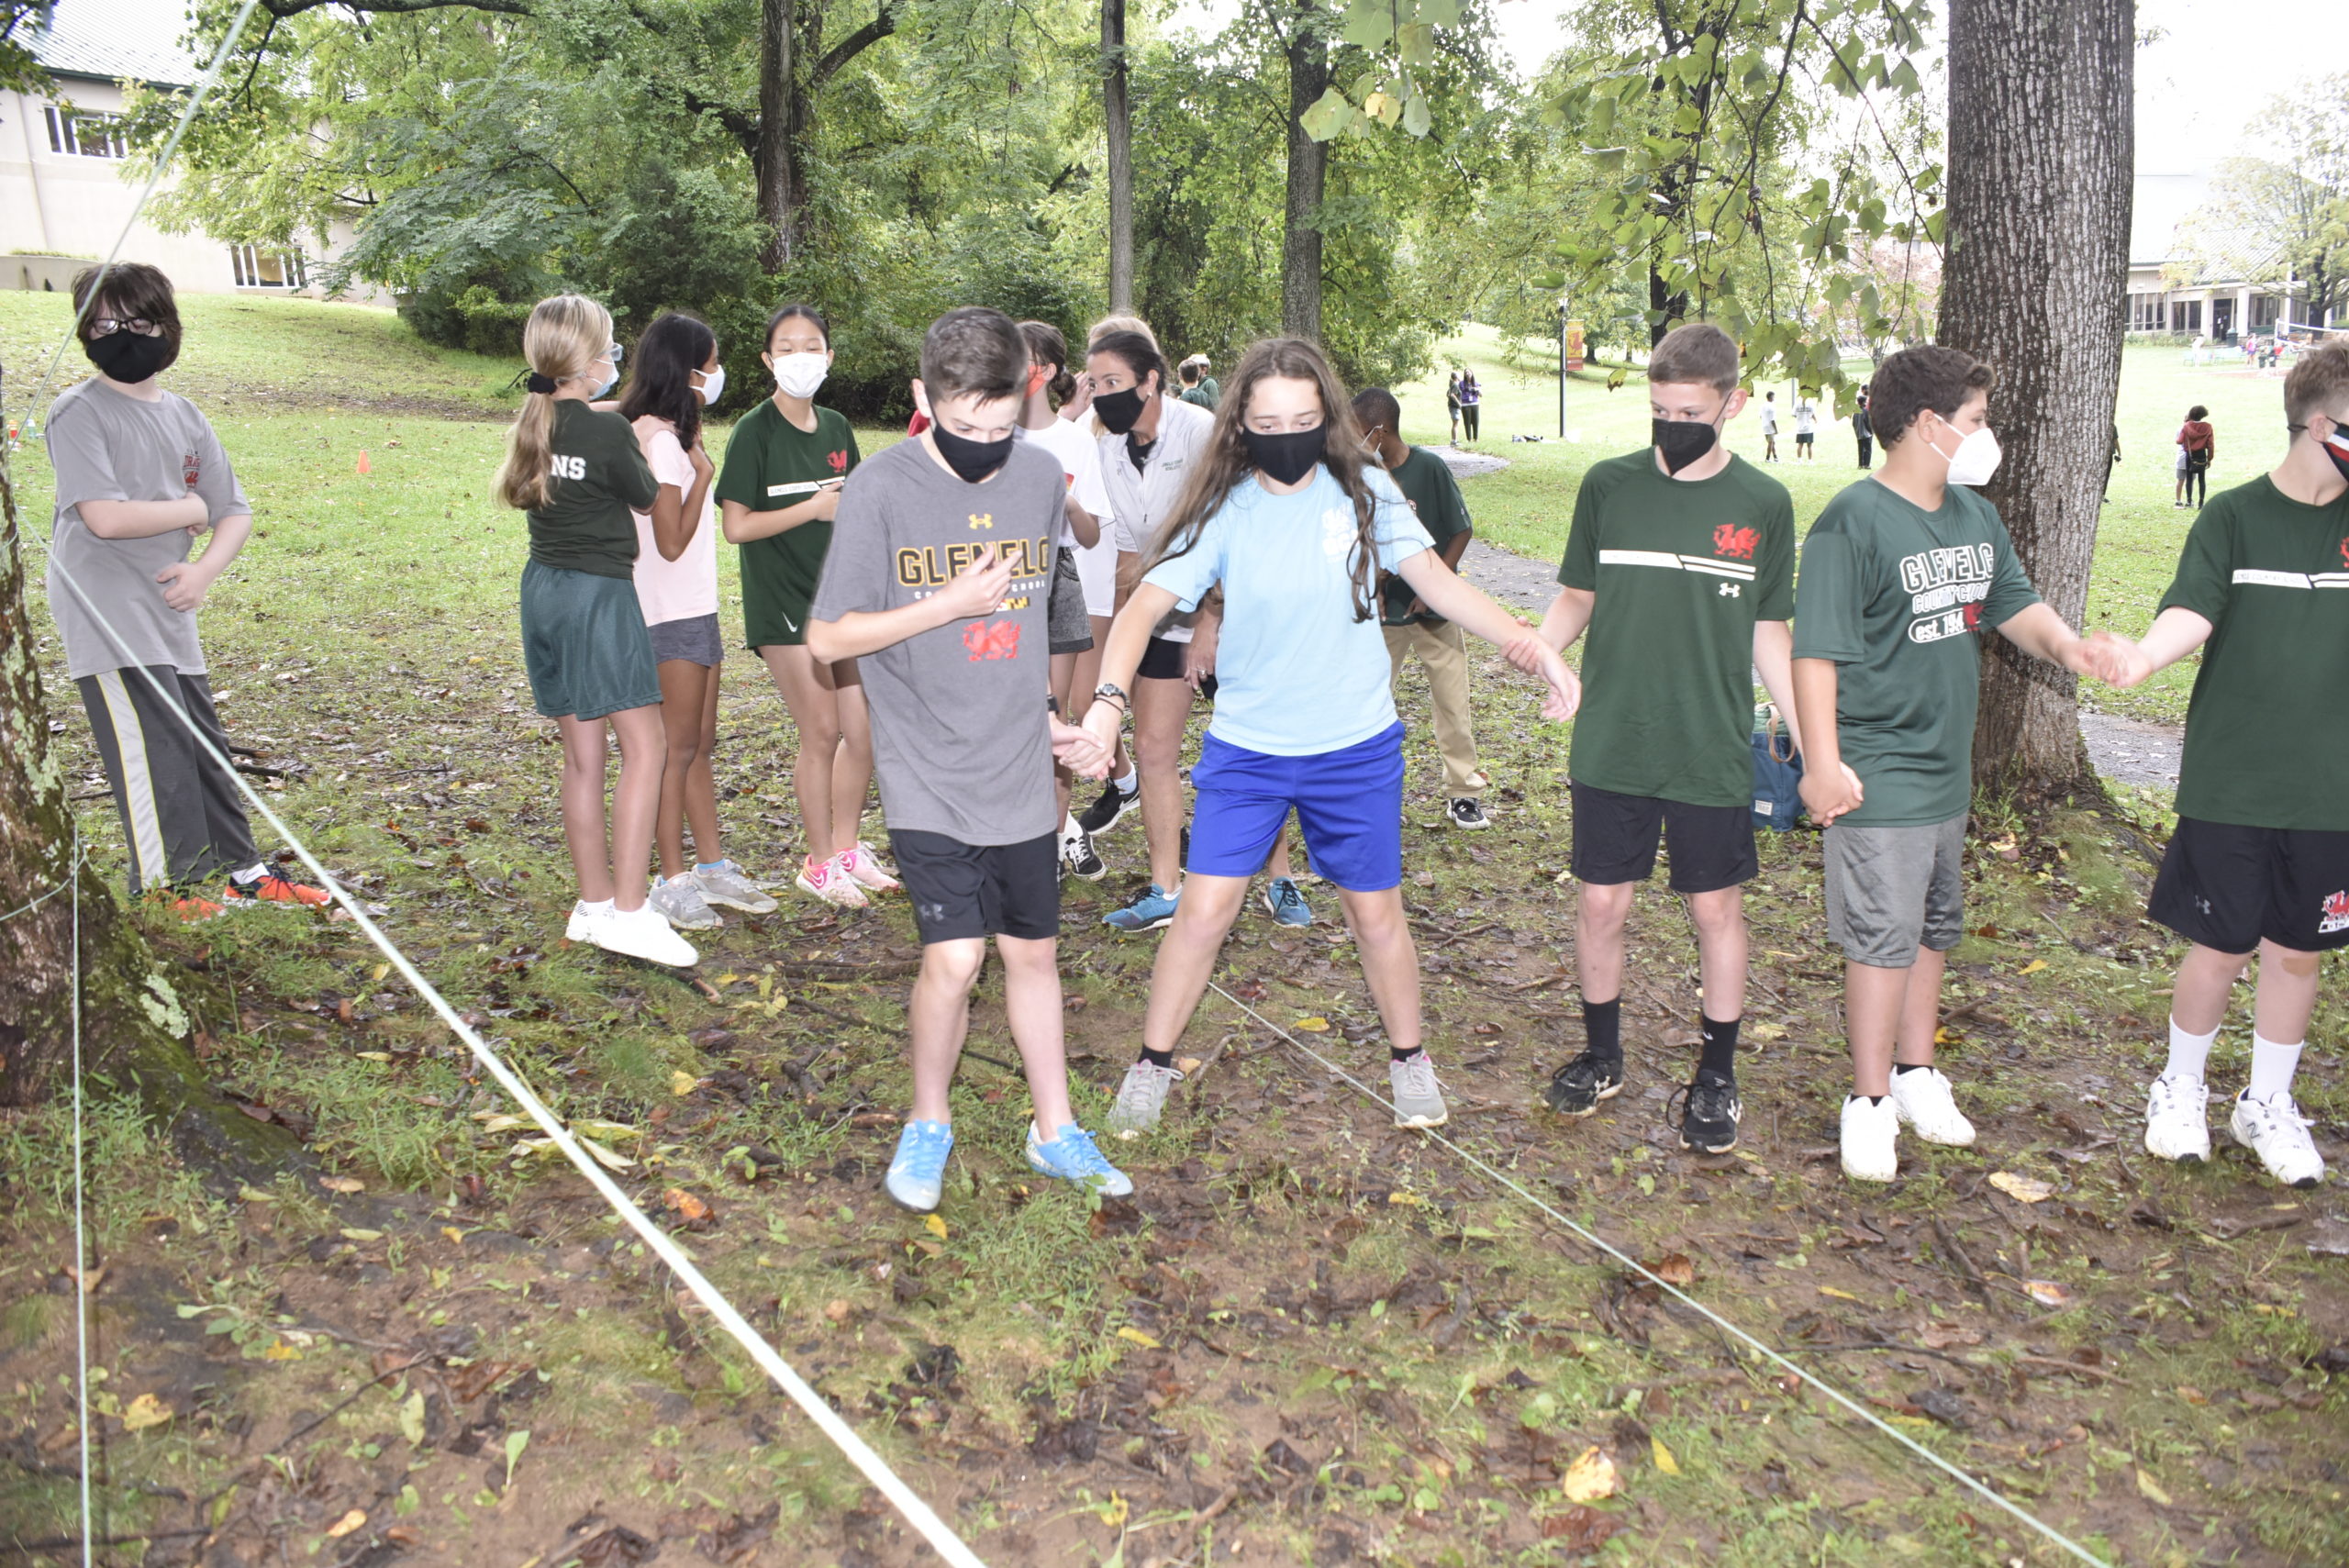 Middle School students attempt to conquer a ropes obstacle course in the woods.